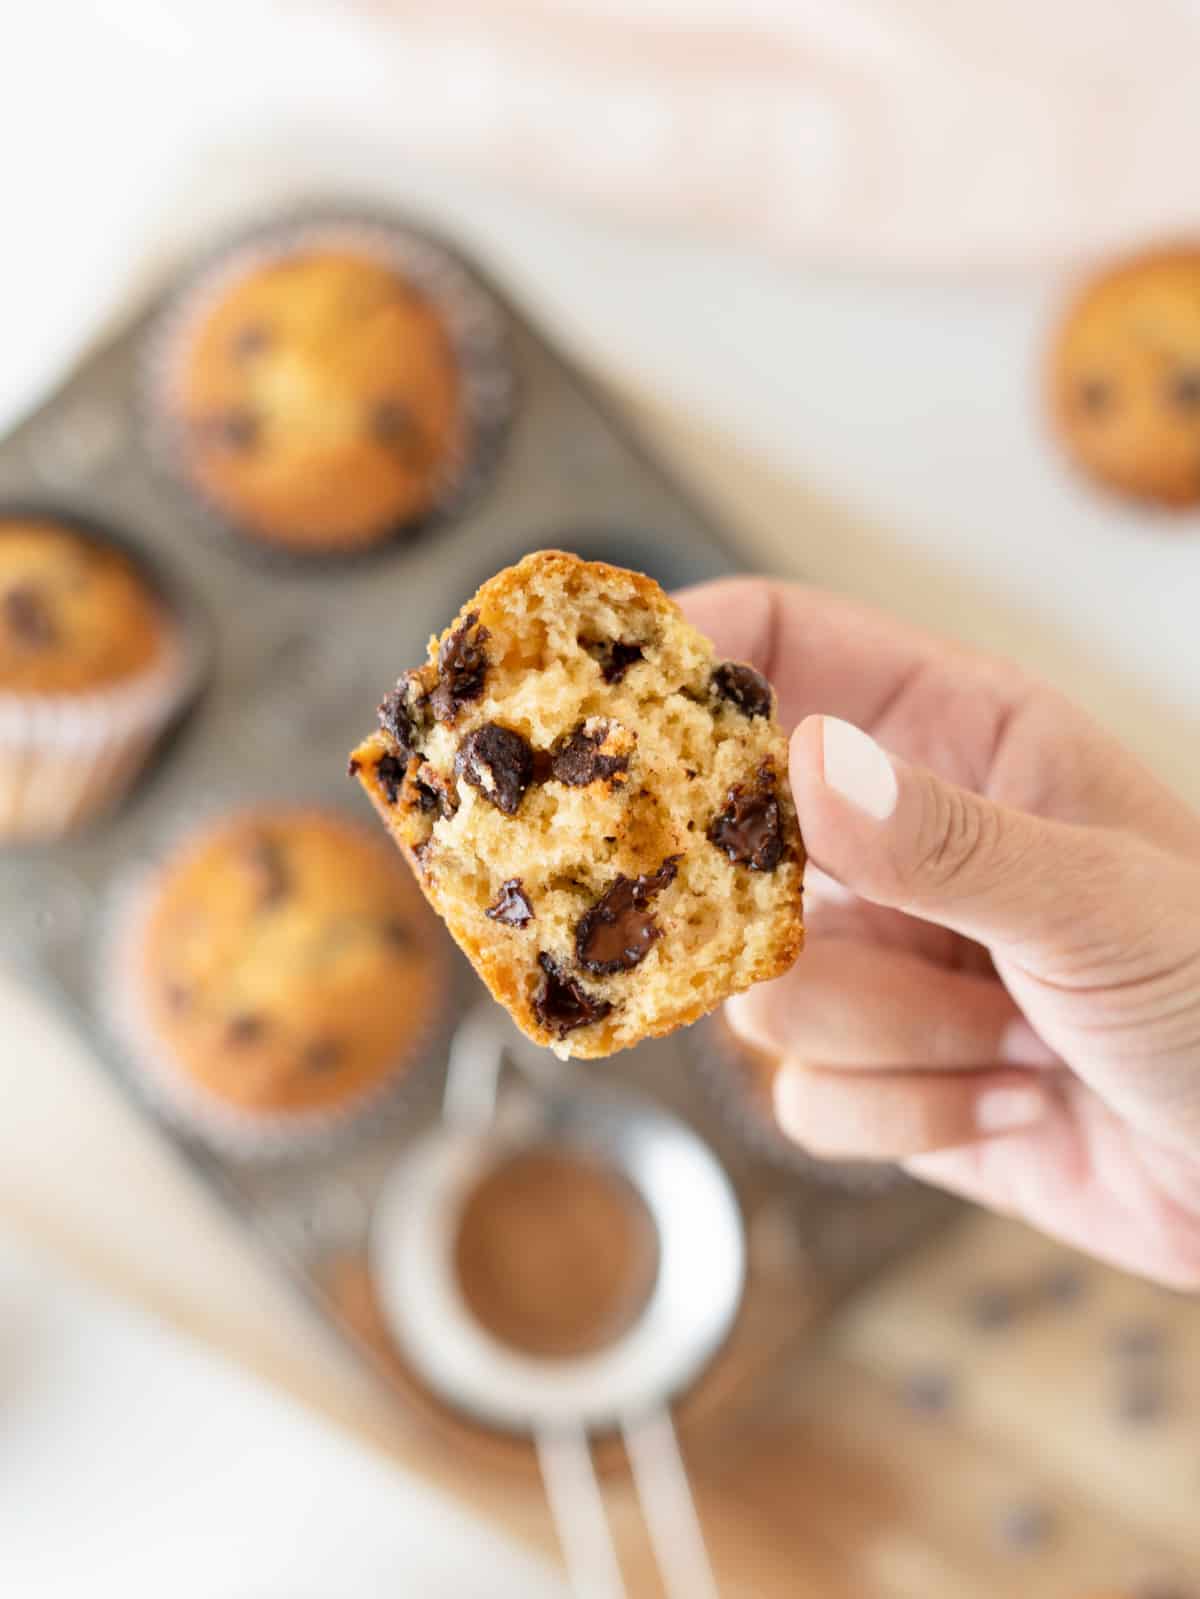 Hand holding half a chocolate chip muffin above pan with several more.